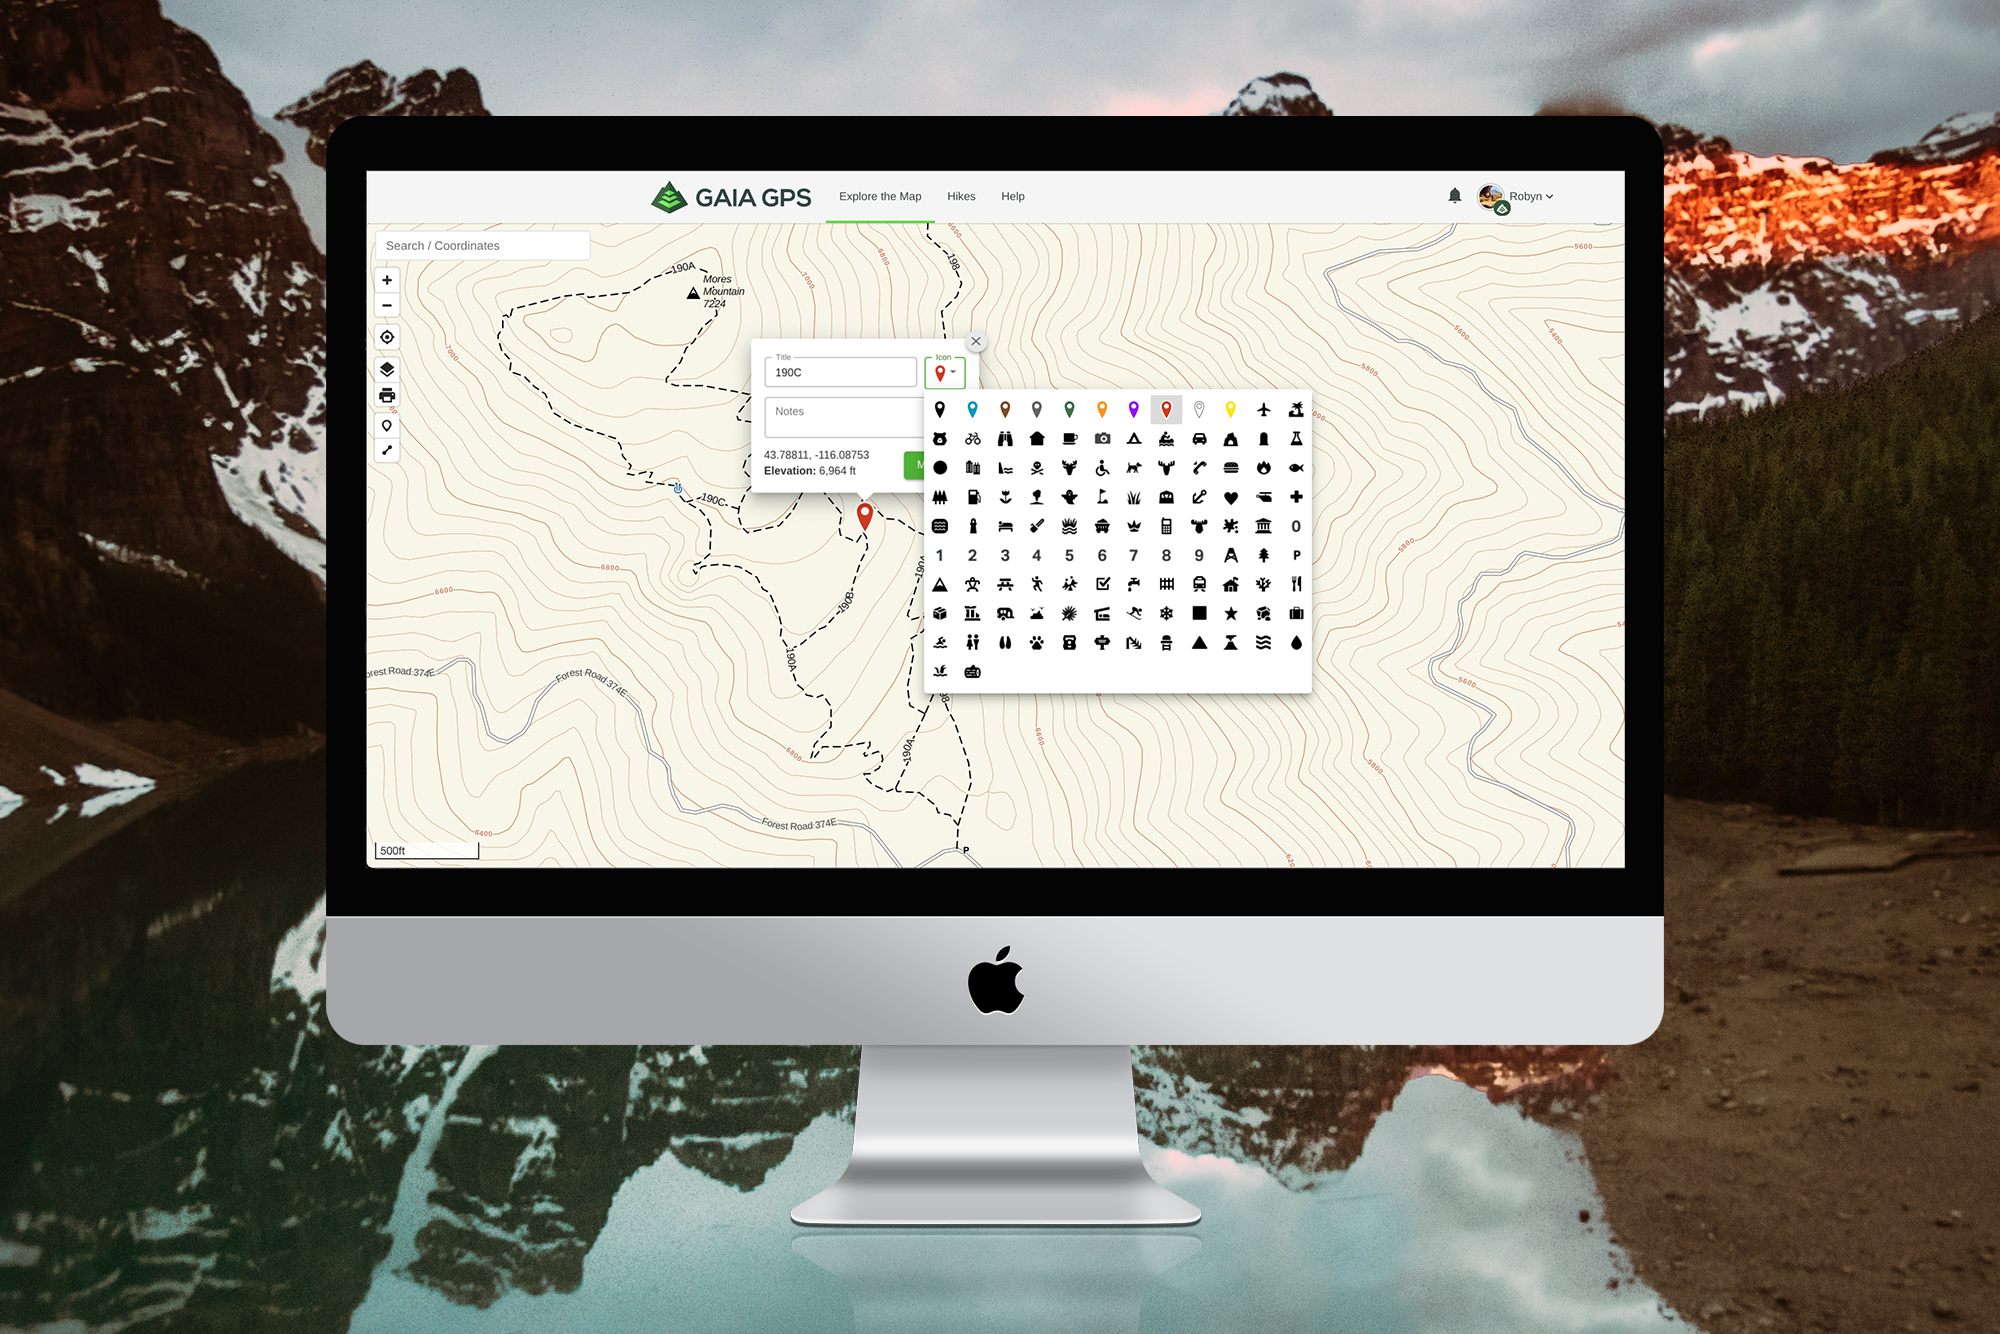 Screen featuring the Gaia GPS main map with new waypoint icons available.